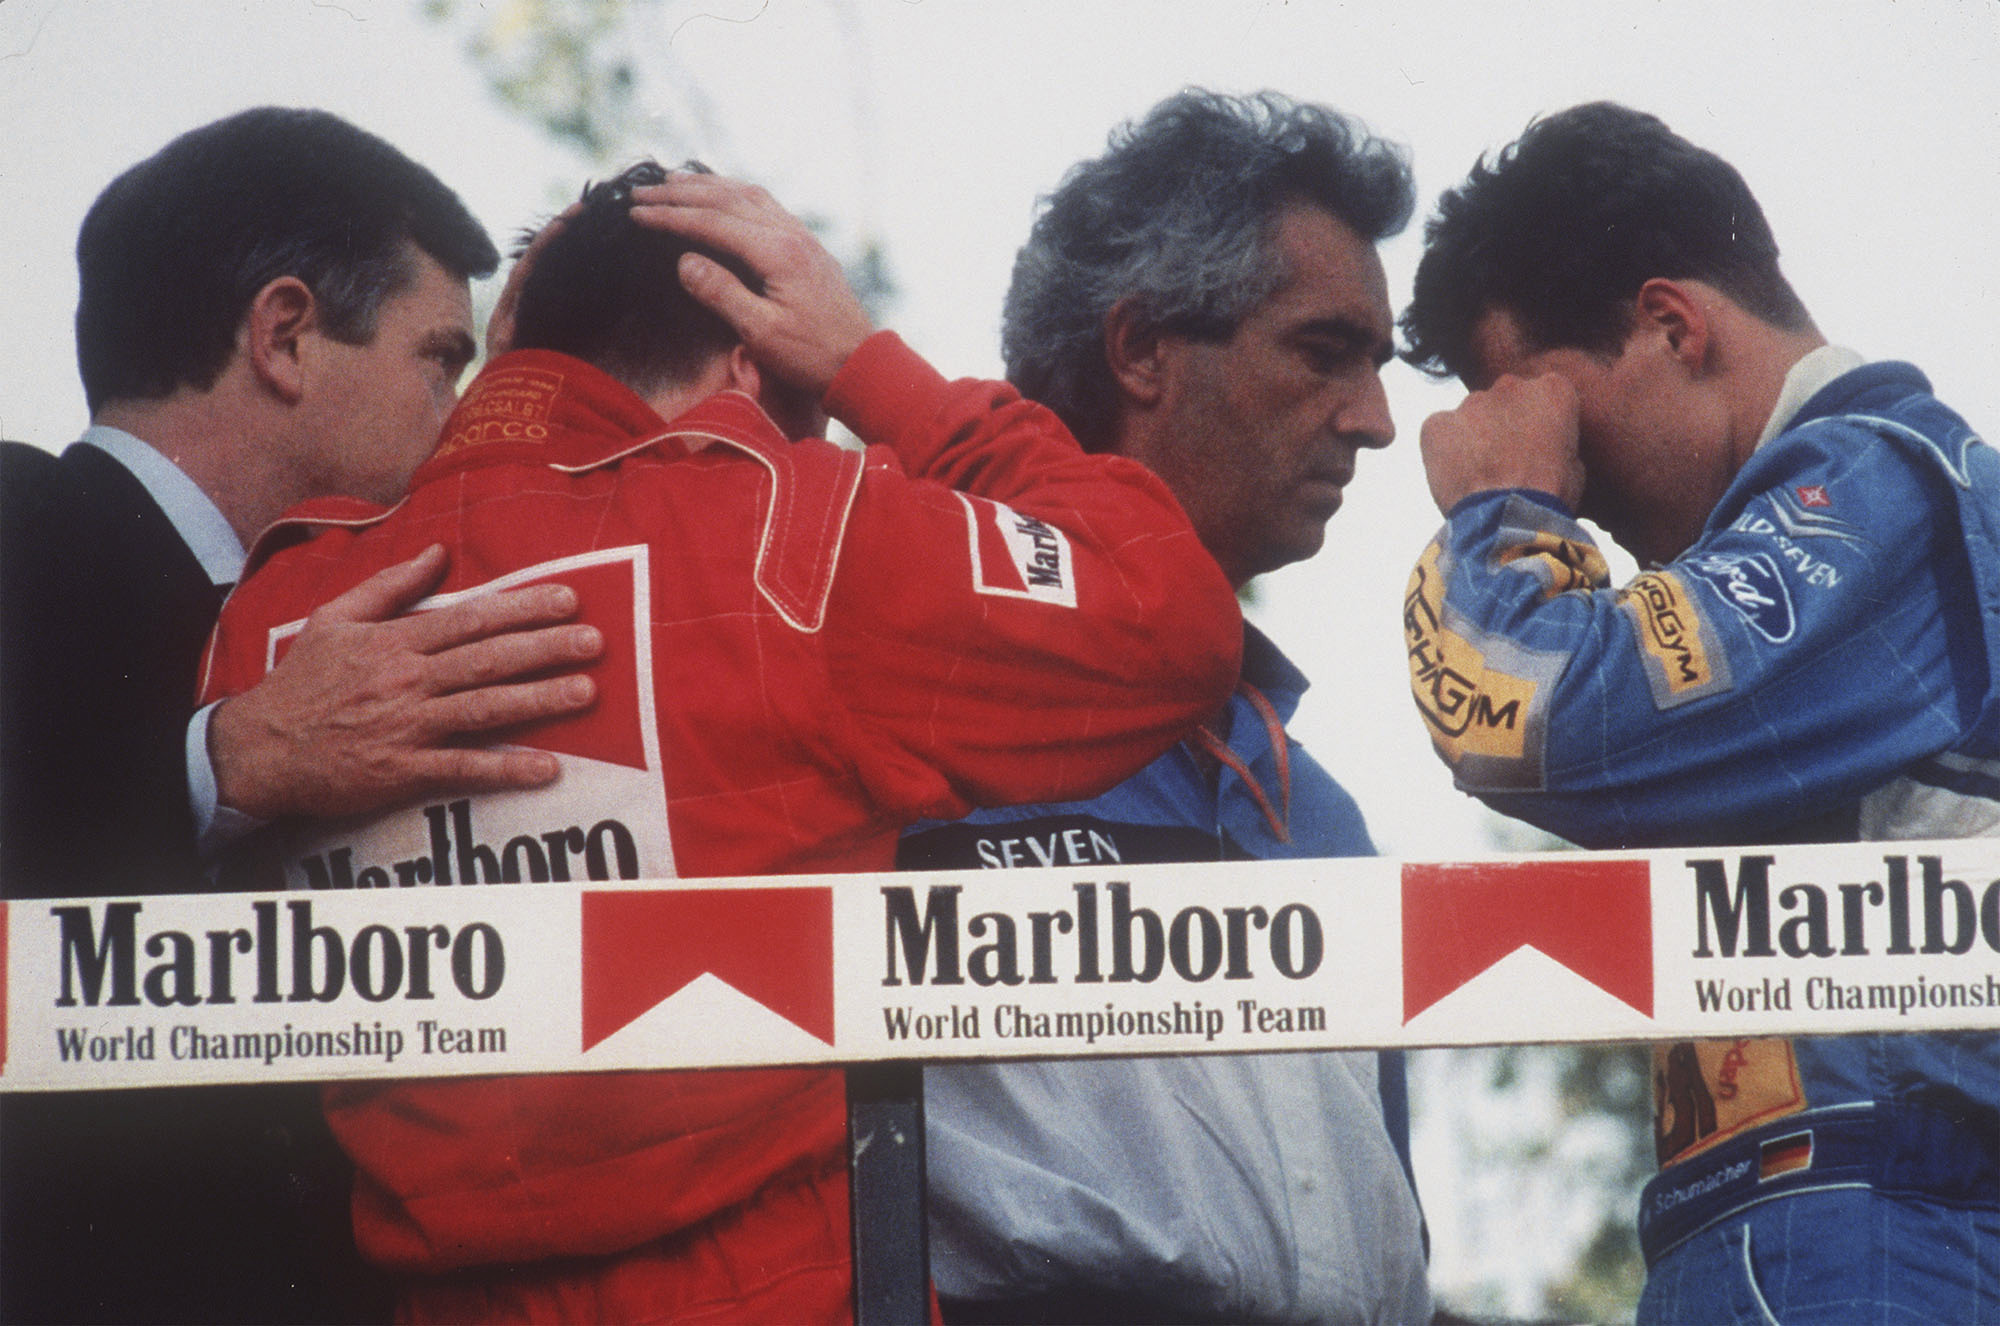 Italy's Nicola Larini, left, holds his head and Germany's Michael Schumacher, right, wipes a tear from his eyes while talking with Benetton director-general Flavio Briatore, center, on the podium following the San Marino Formula One Grand Prix crash in Imola, Italy, May 1, 1994. The drivers were reacting to the news that the Brazilian driver Ayrton Senna was in critical condition at a Bologna hospital.